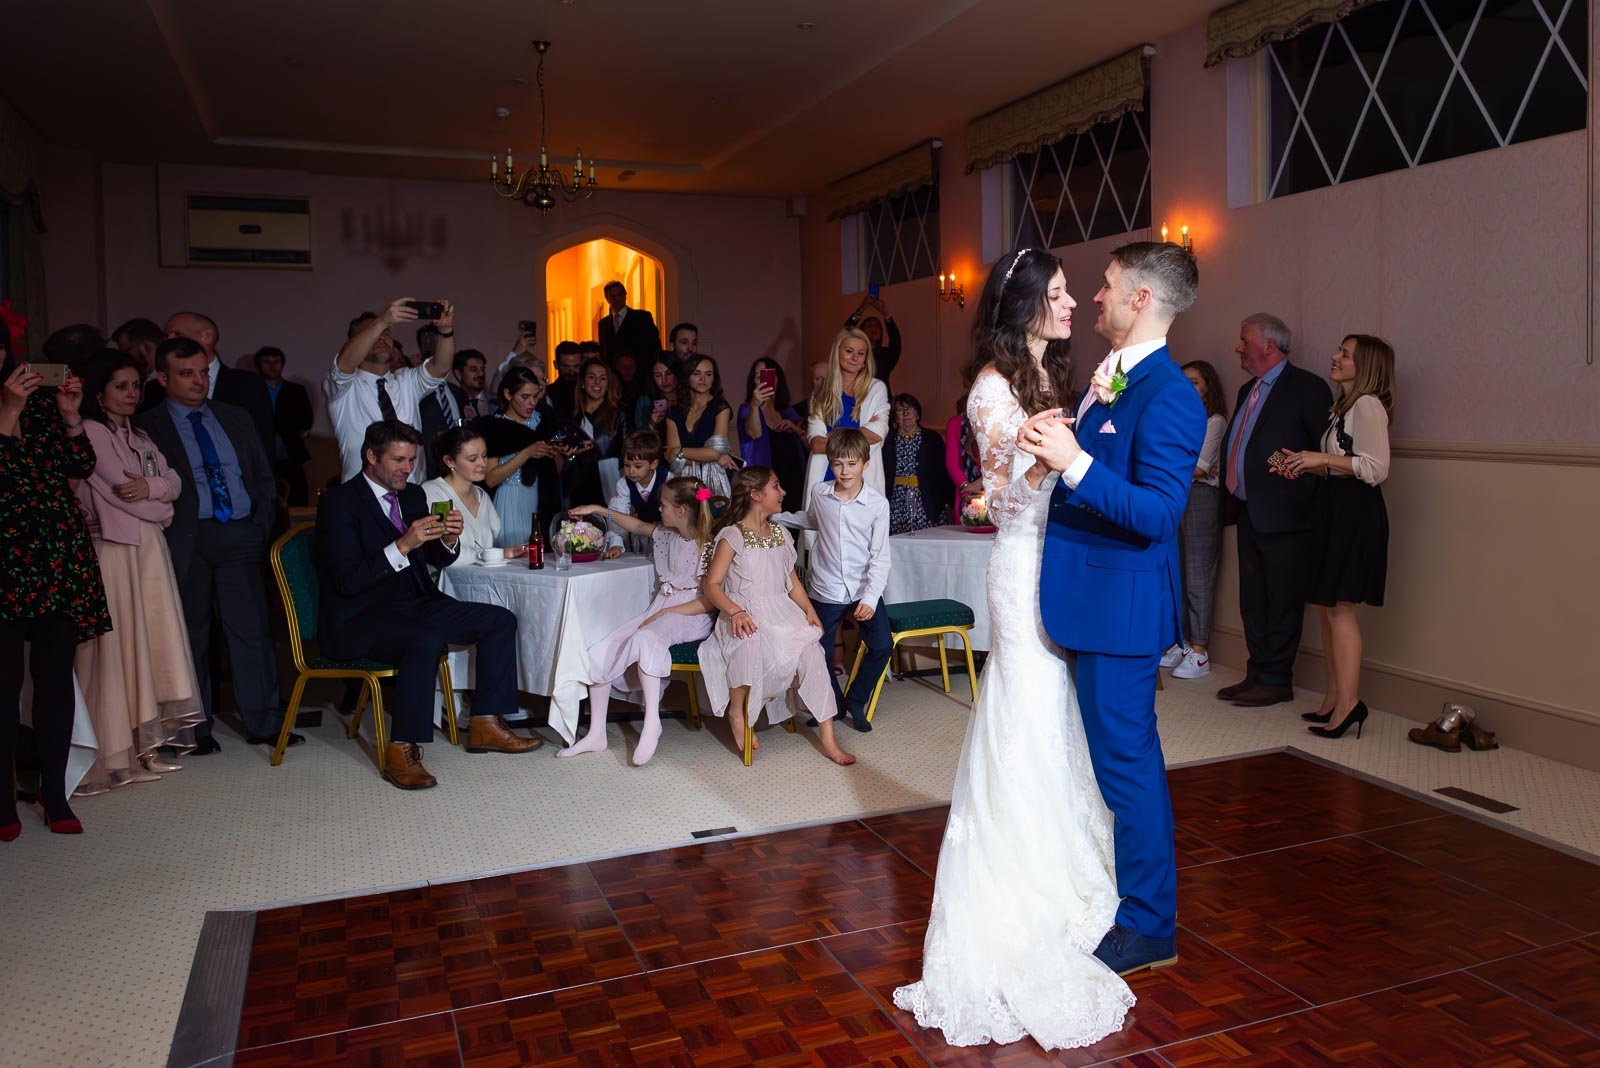 Virginia and Simon enjoy their first dance in the company of their wedding guests in Horsted Place Hotel.